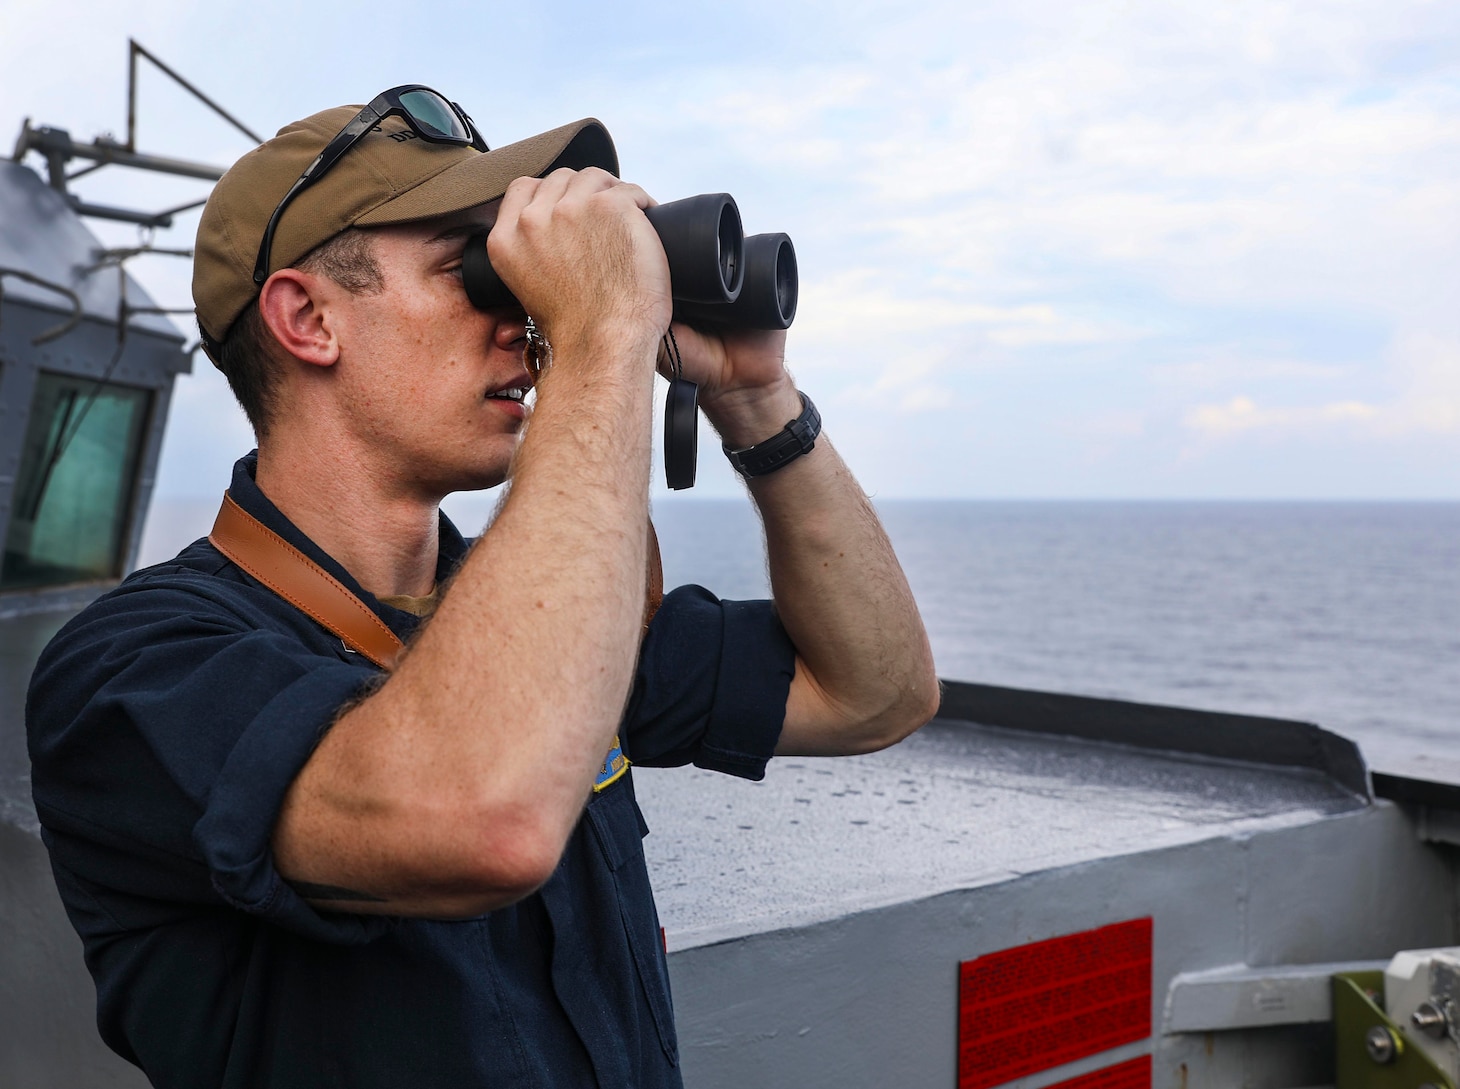 210712-N-FO714-1033 SOUTH CHINA SEA (July 12, 2021) Lt.j.g. Andrew Hayne, from Parker, Colo., uses binoculars to monitor a surface contact from the bridge wing of the Arleigh Burke-class guided-missile destroyer USS Benfold (DDG 65) while conducting routine underway operations. Benfold is forward-deployed to the U.S. 7th Fleet area of operations in support of a free and open Indo-Pacific. (U.S. Navy photo by Mass Communication Specialist 1st Class Deanna C. Gonzales)